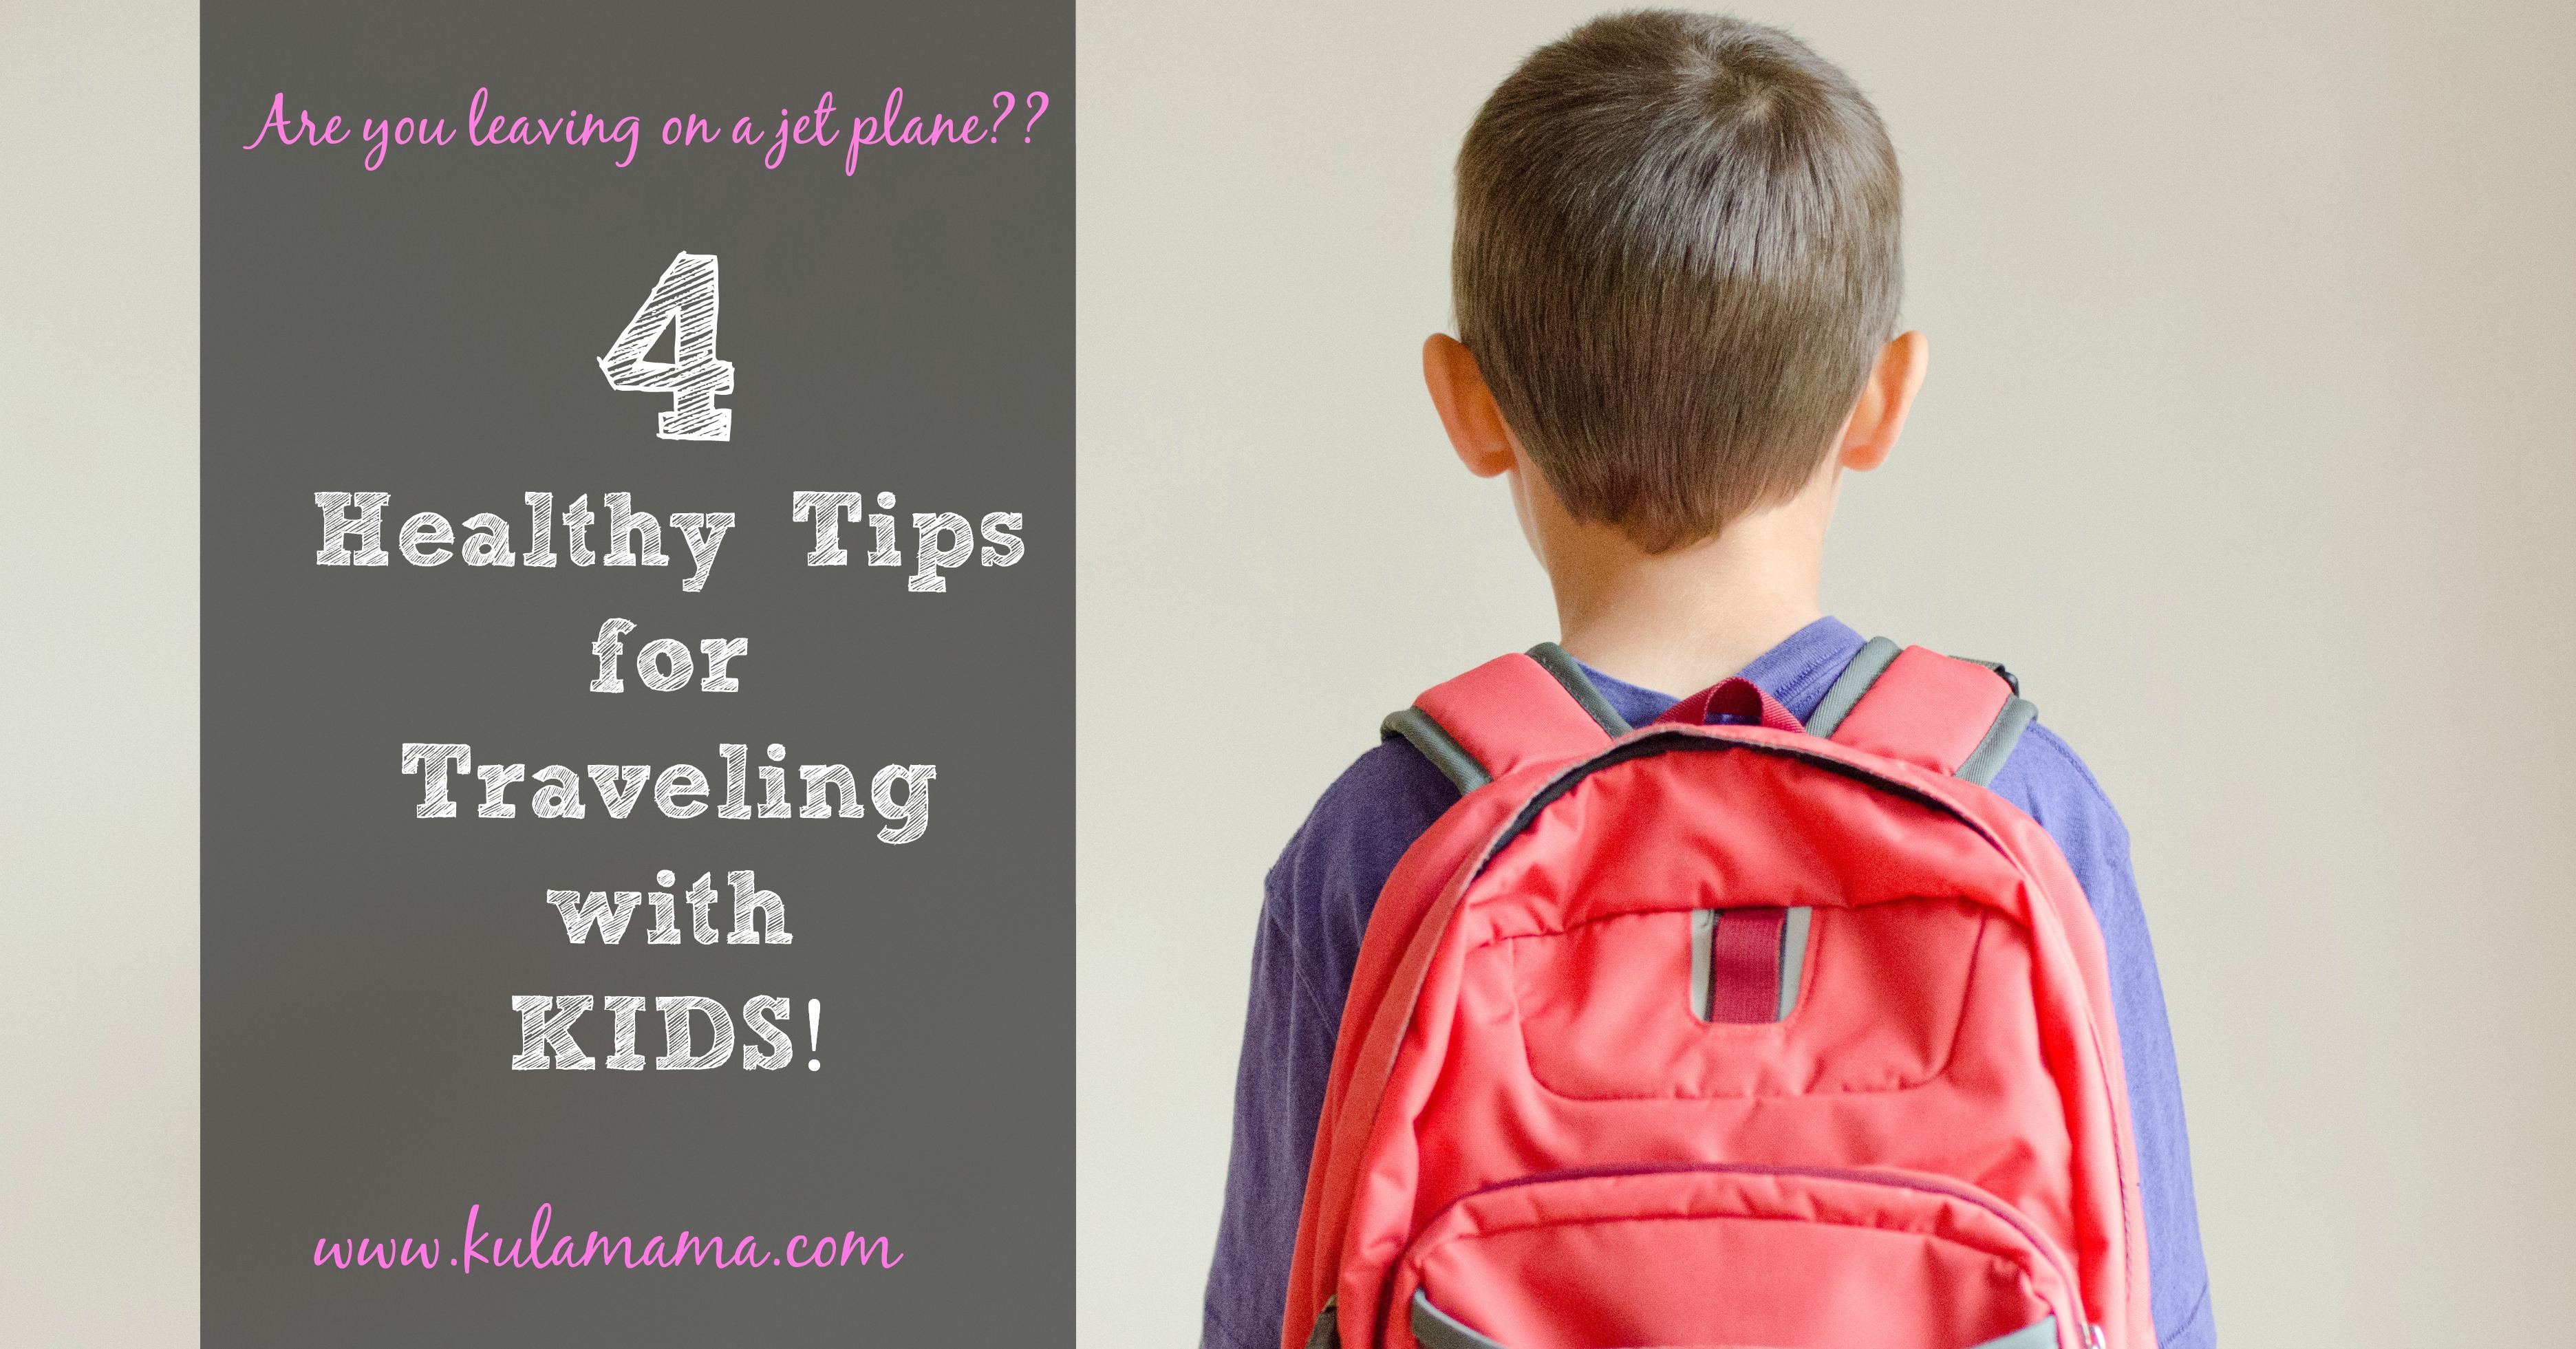 4 Healthy Tips for Traveling with Kids